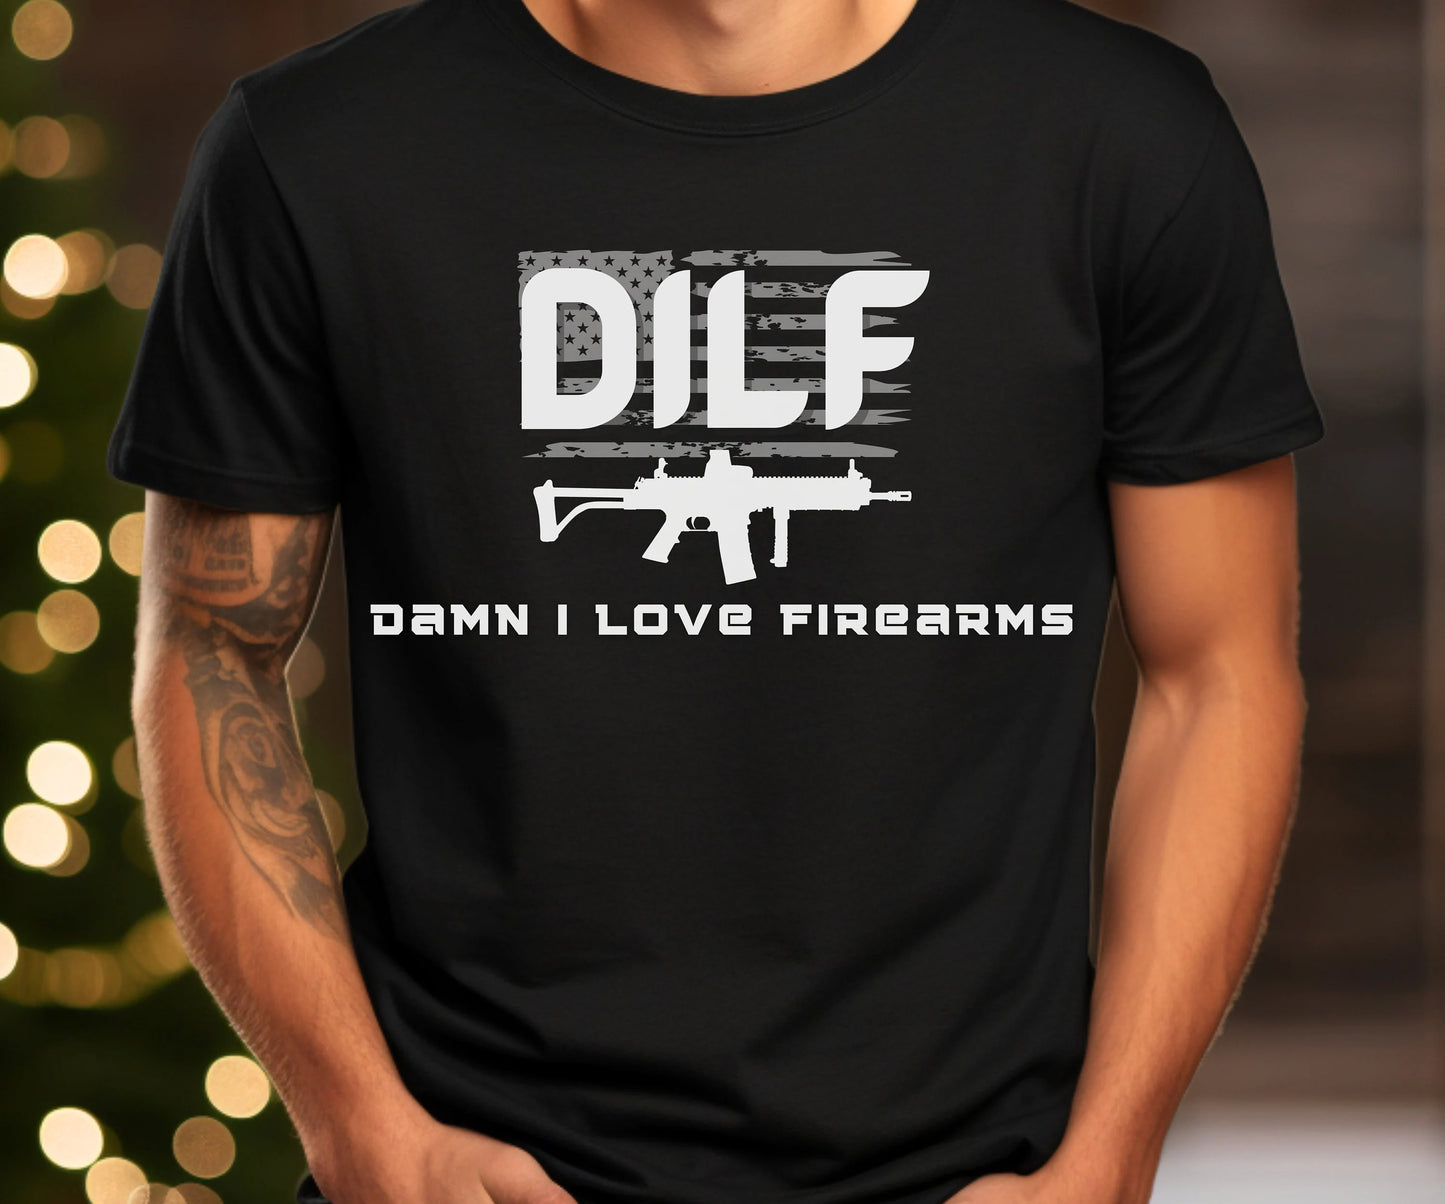 DILF Shirt, Firearm Dad T-Shirt, Gift For Him, Gift For Dad